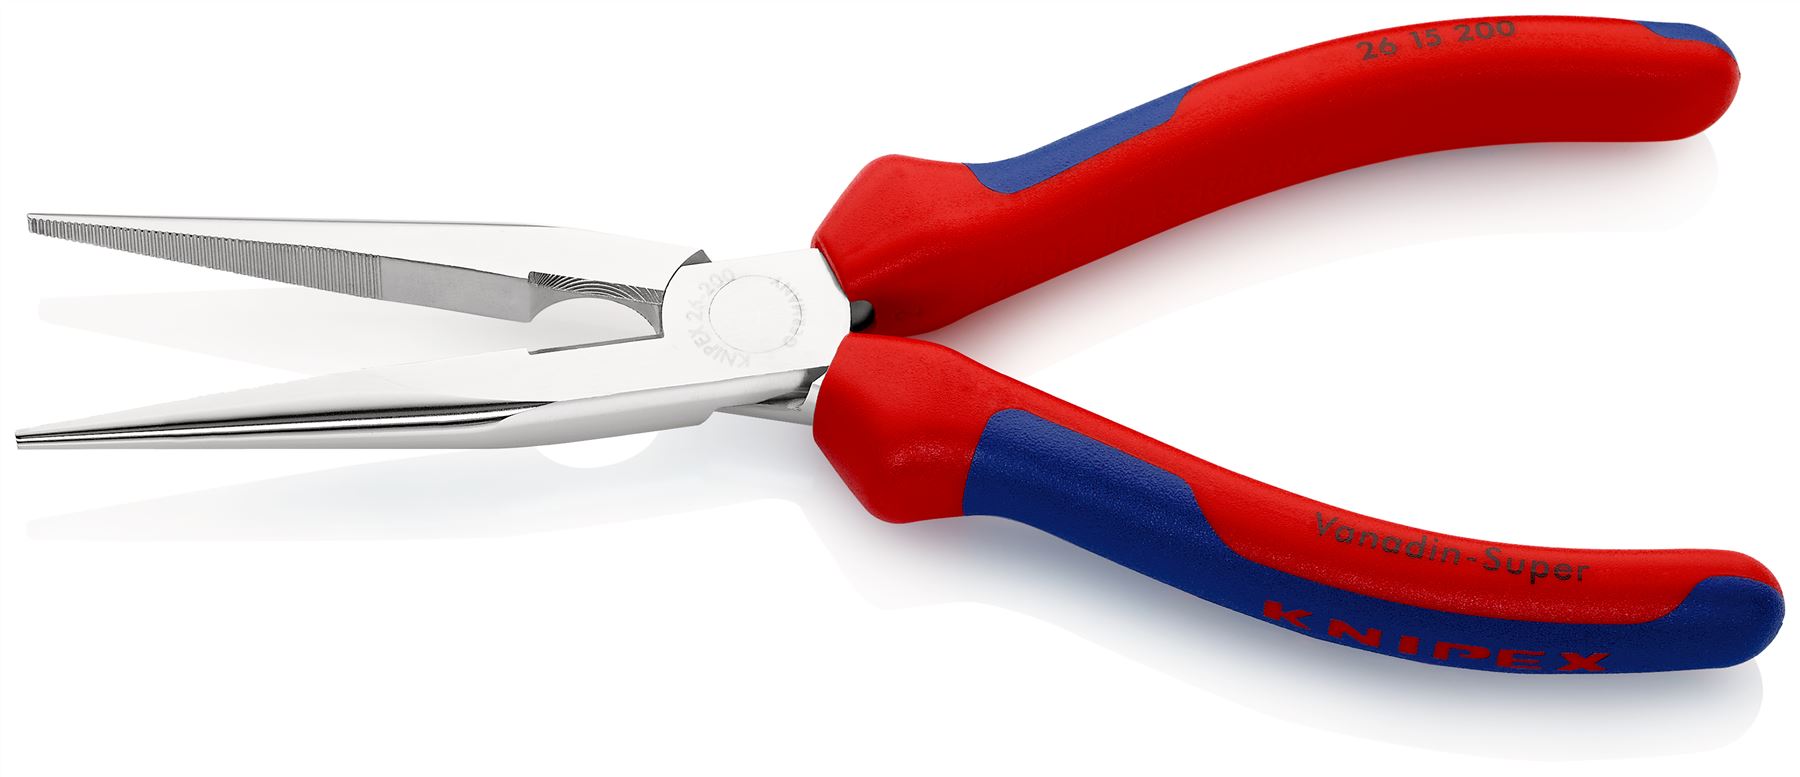 Knipex Snipe Nose Side Cutting Pliers Chrome 200mm Stork Beak Plier Multi Component Grips 26 15 200